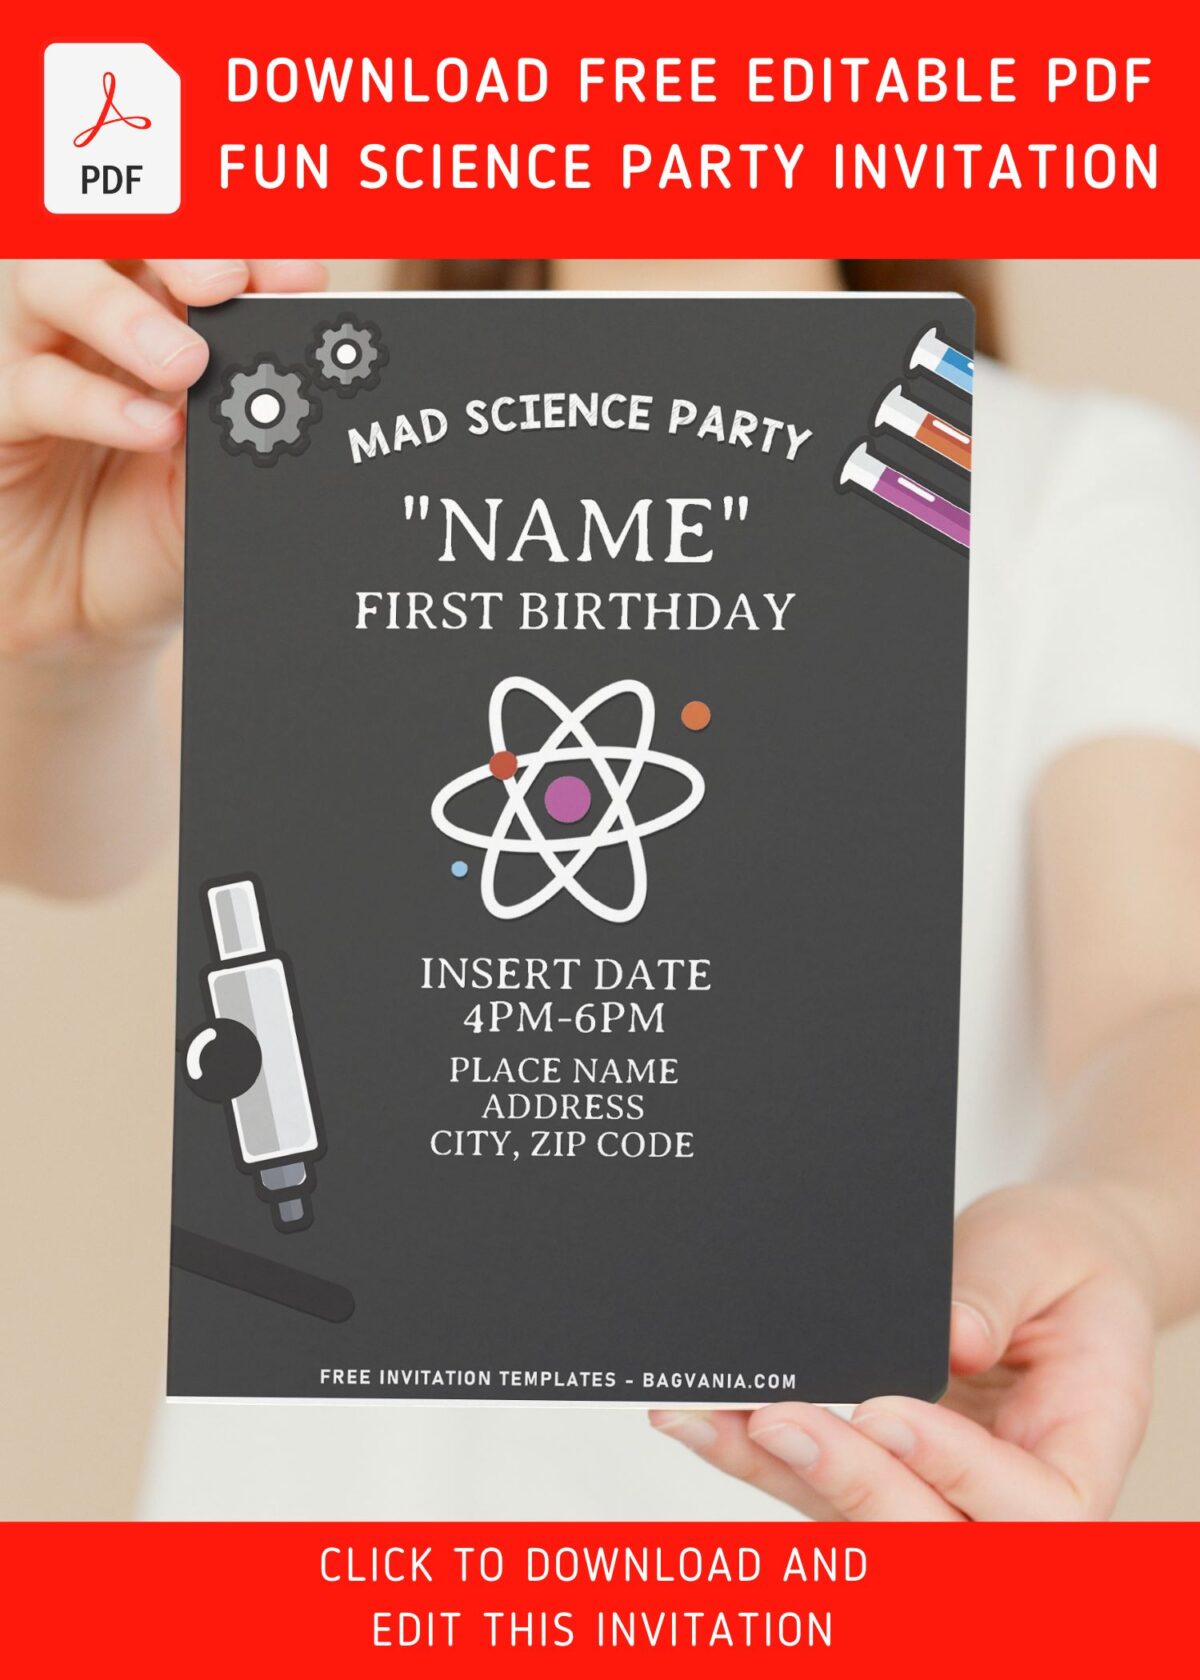 (Free Editable PDF) Fabulous Mad Scientist Birthday Party Invitation Templates with colorful cartoon lab equipment